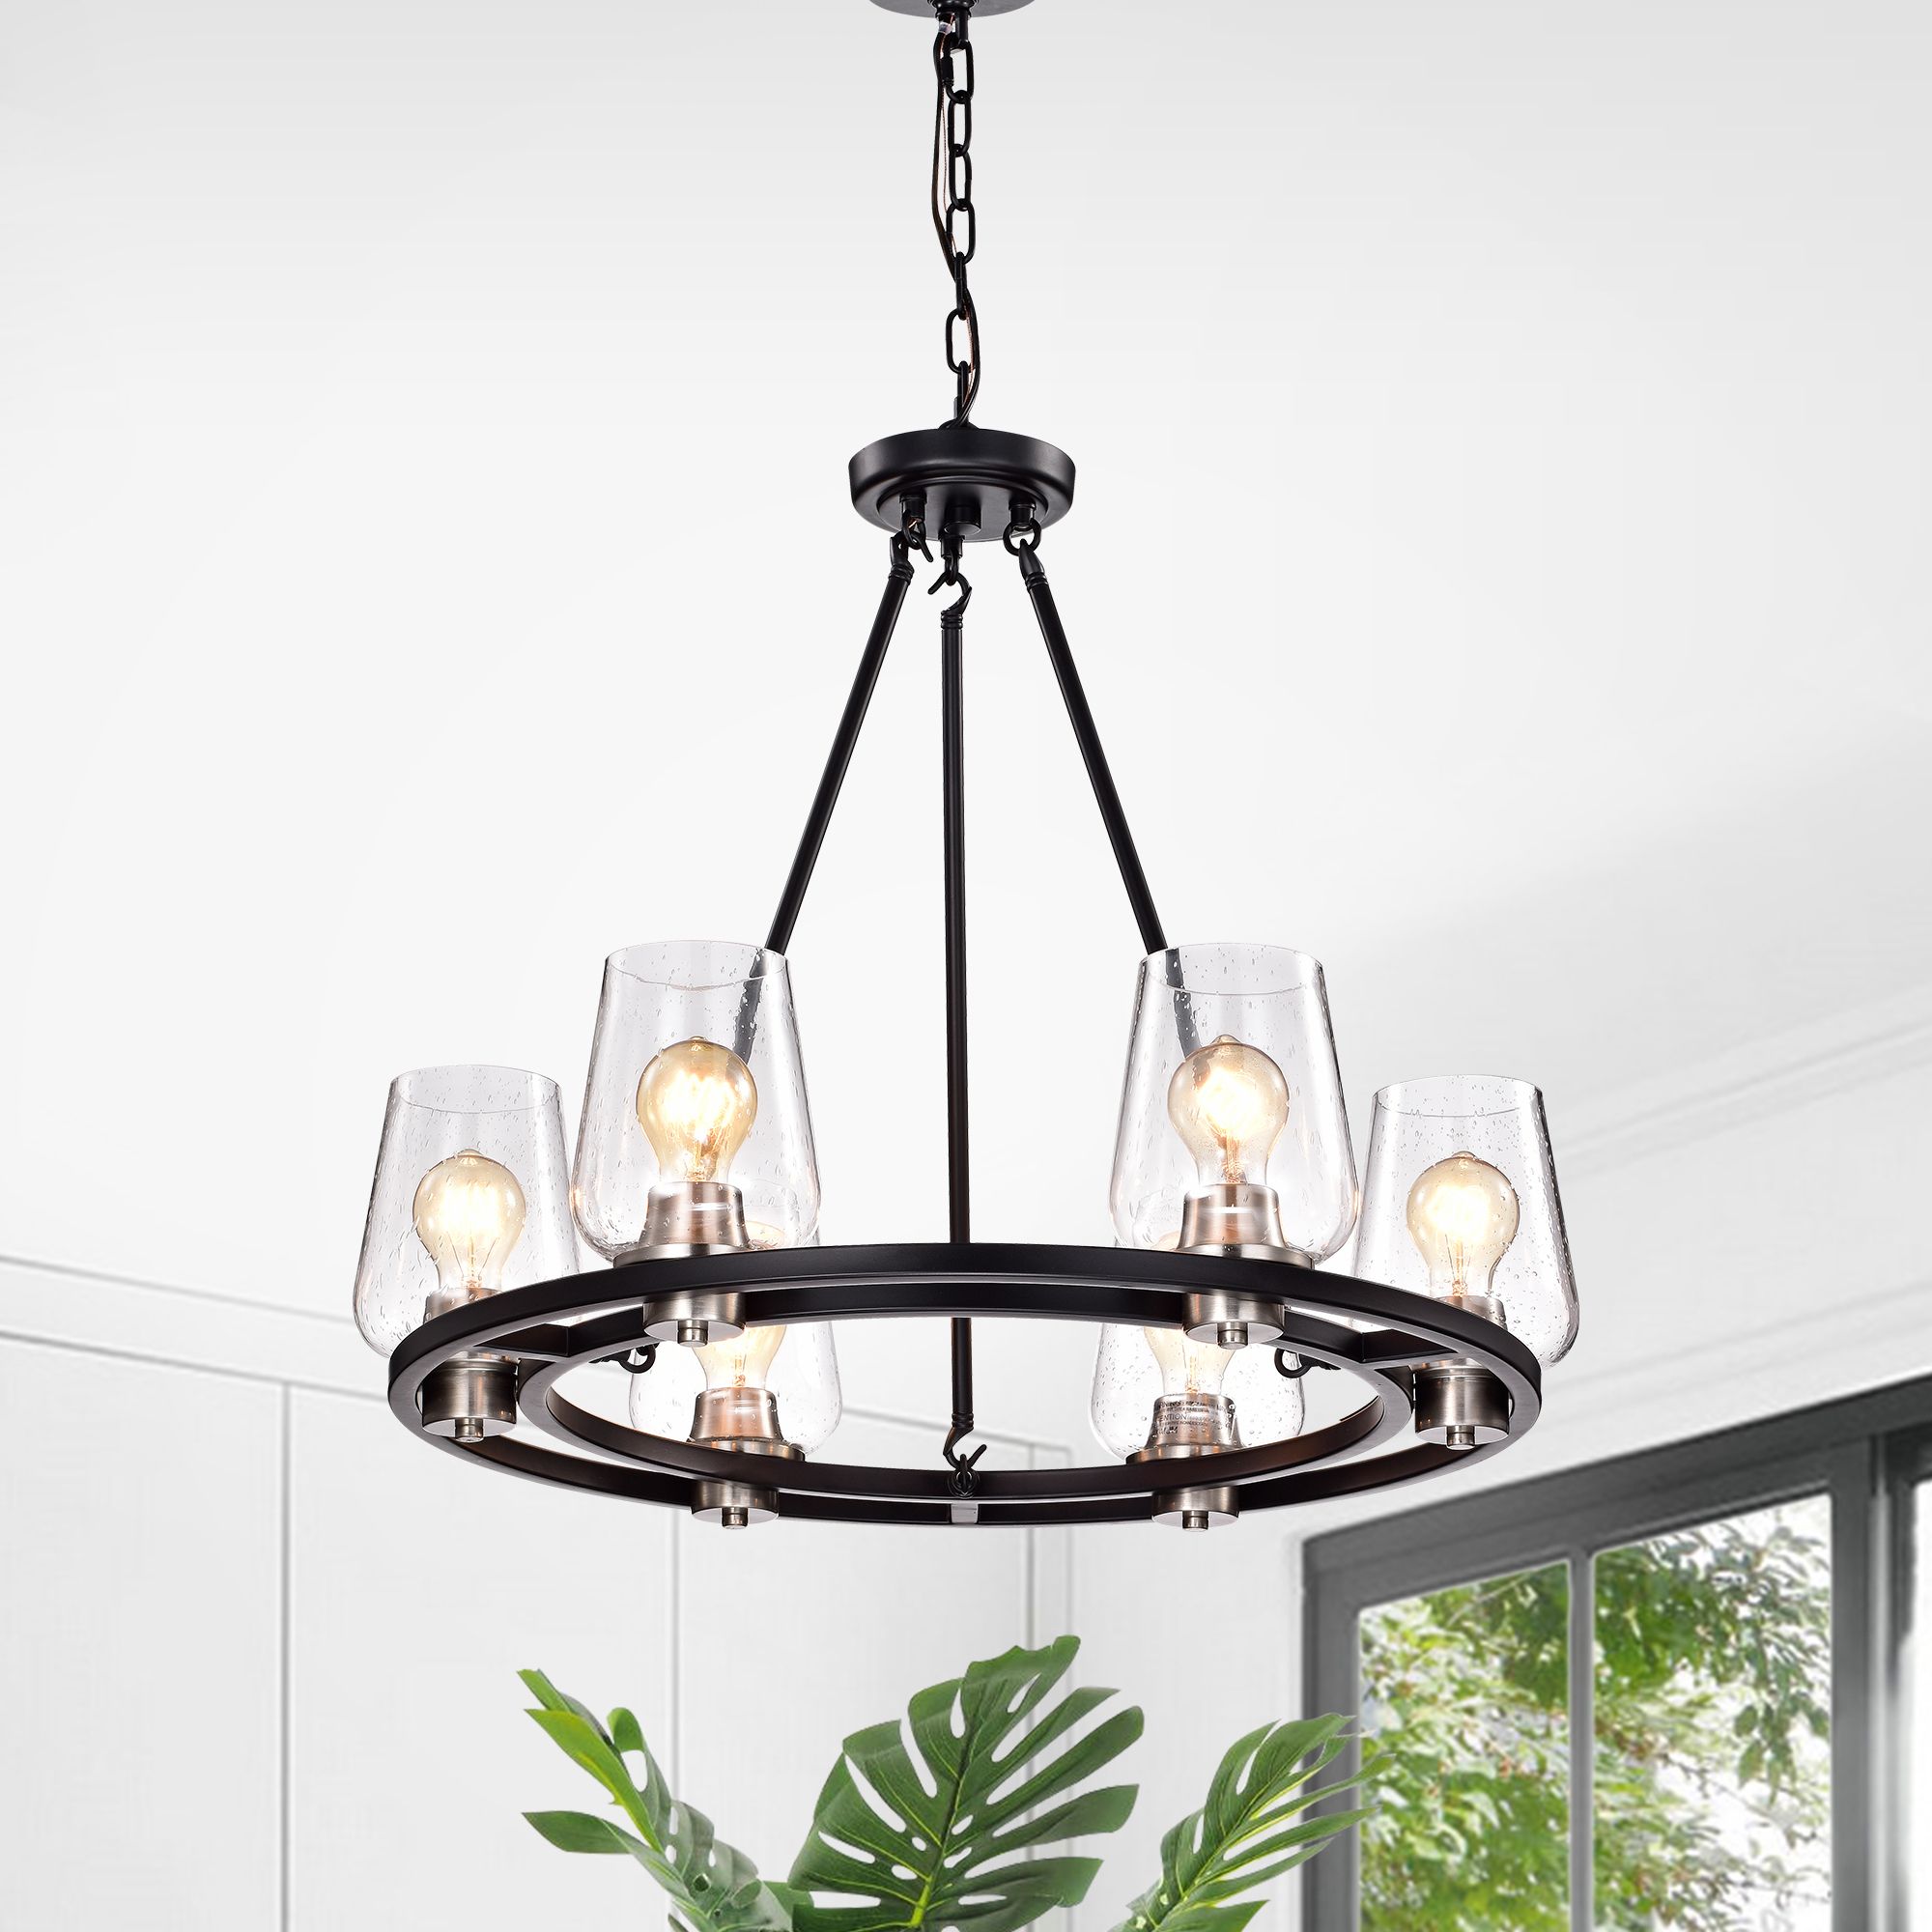 6 Light Black And Brushed Nickel Circular Chandelier With In Six Light Chandeliers (View 5 of 15)